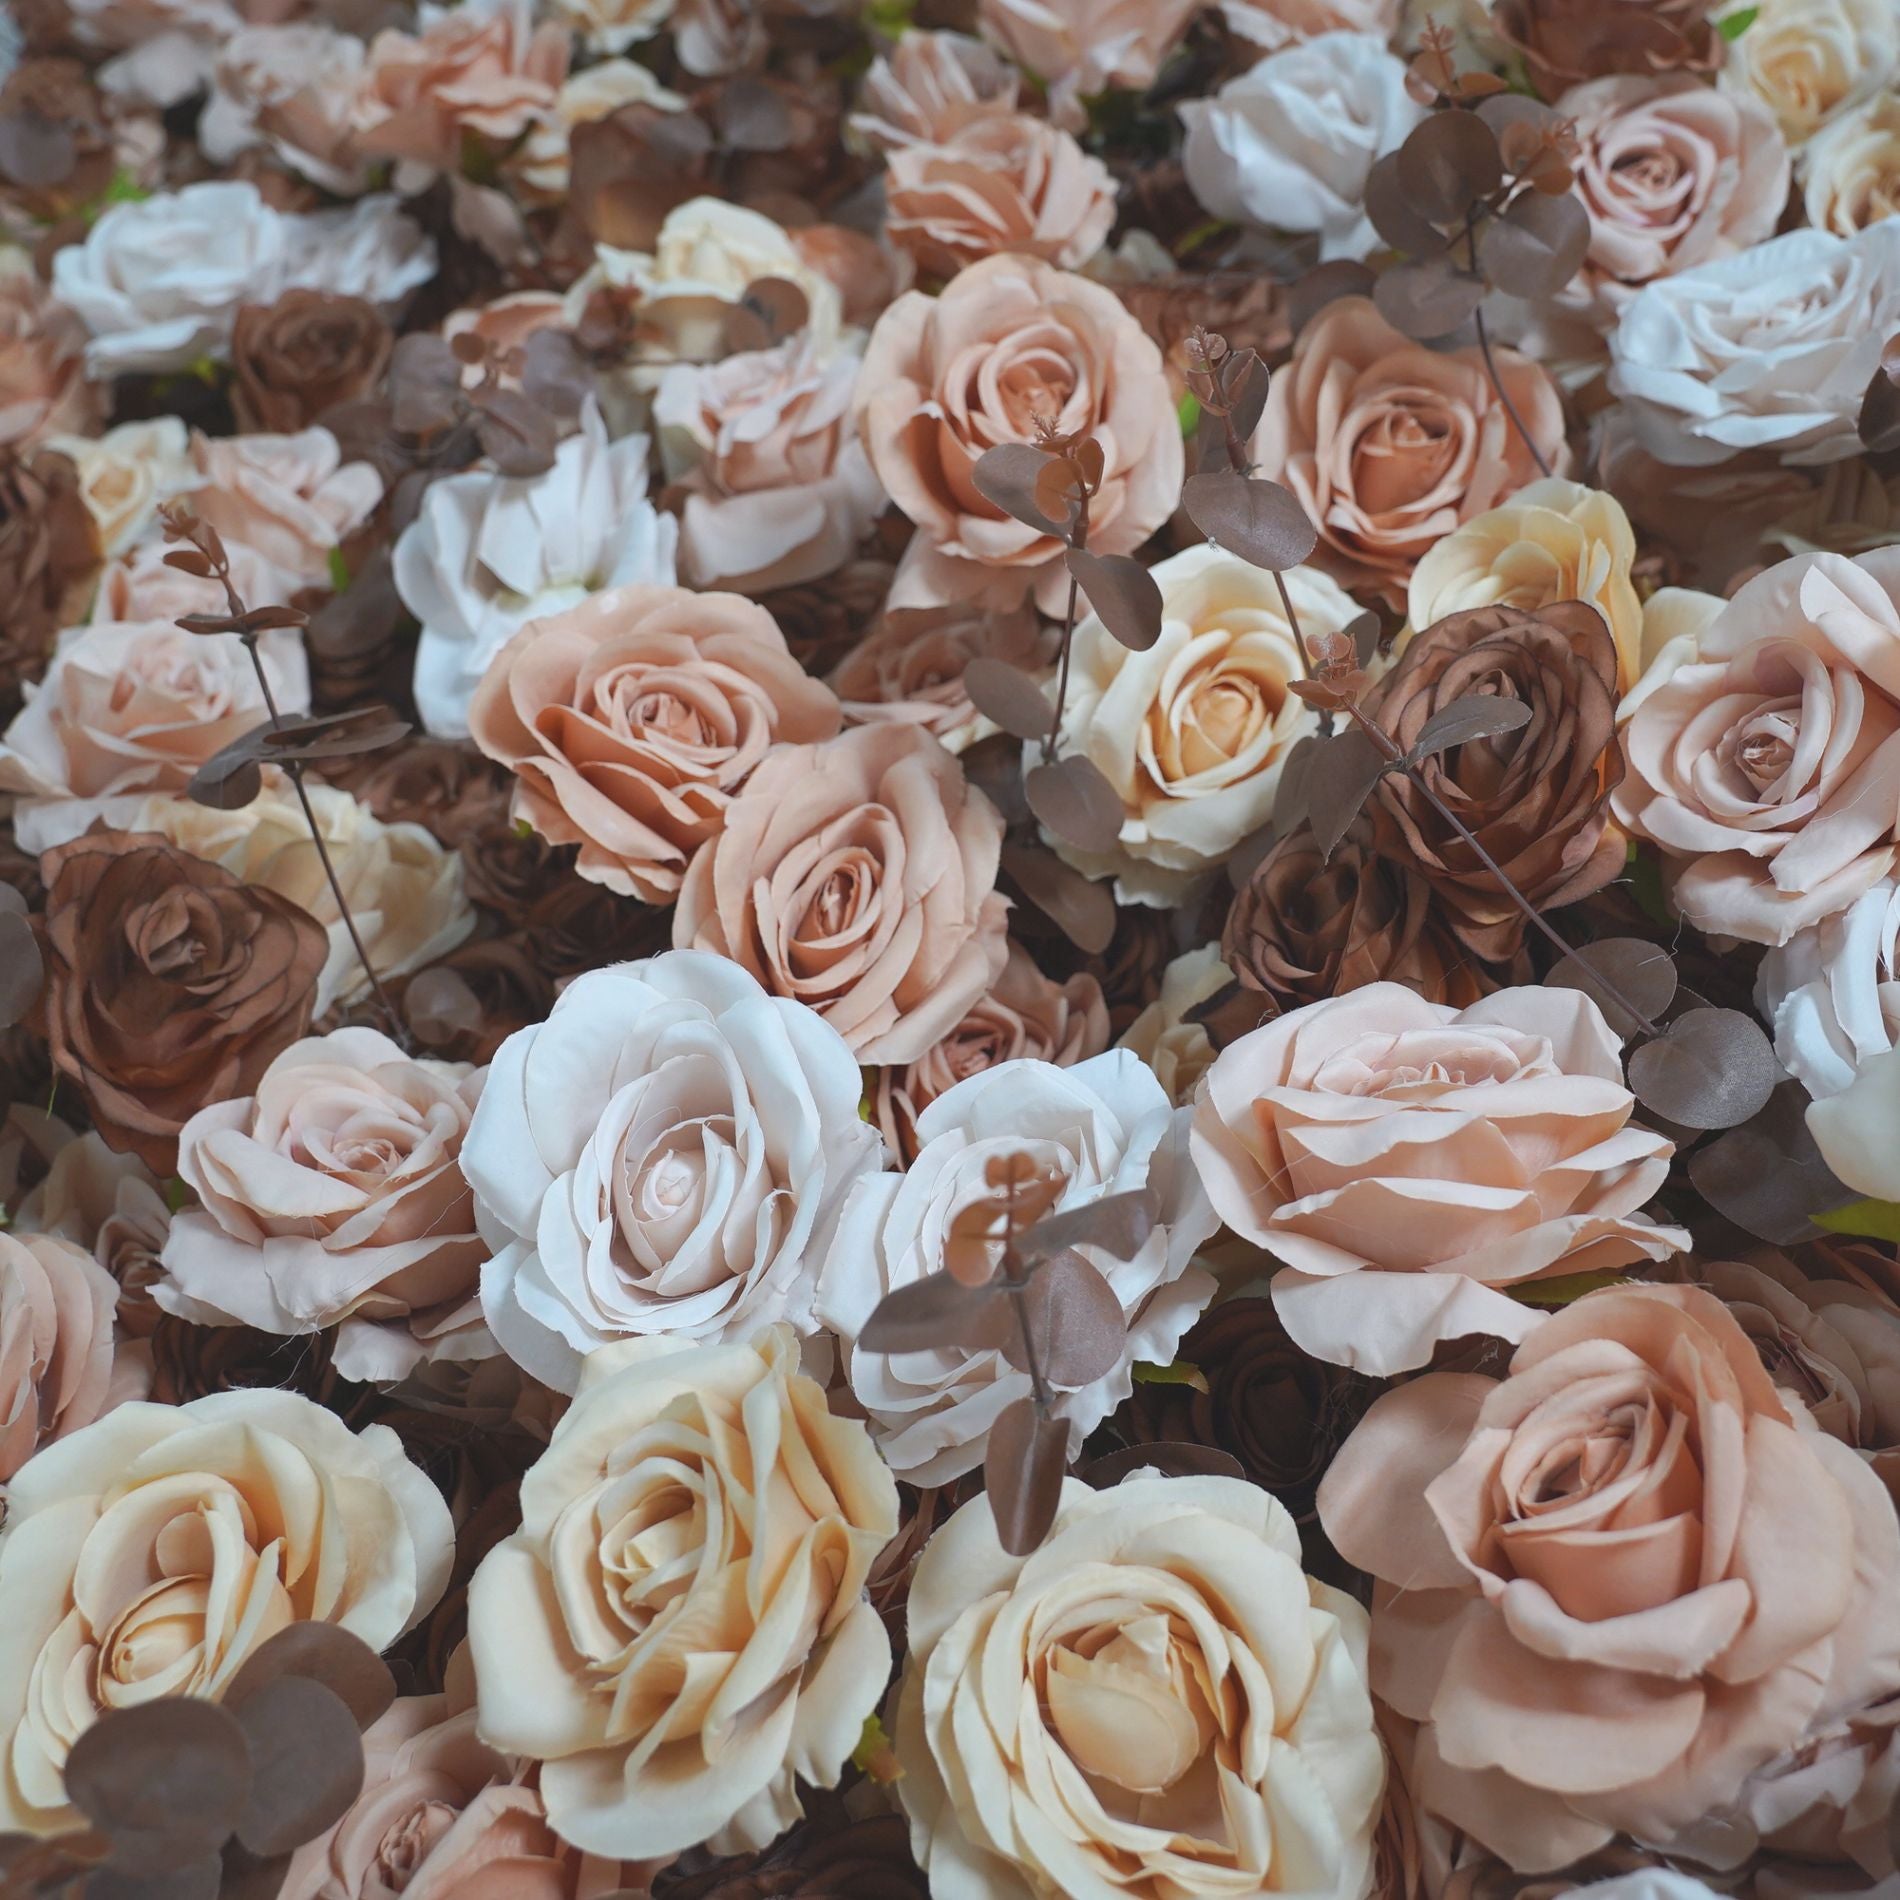 The coffee champagne flower wall backdrop looks romantic.